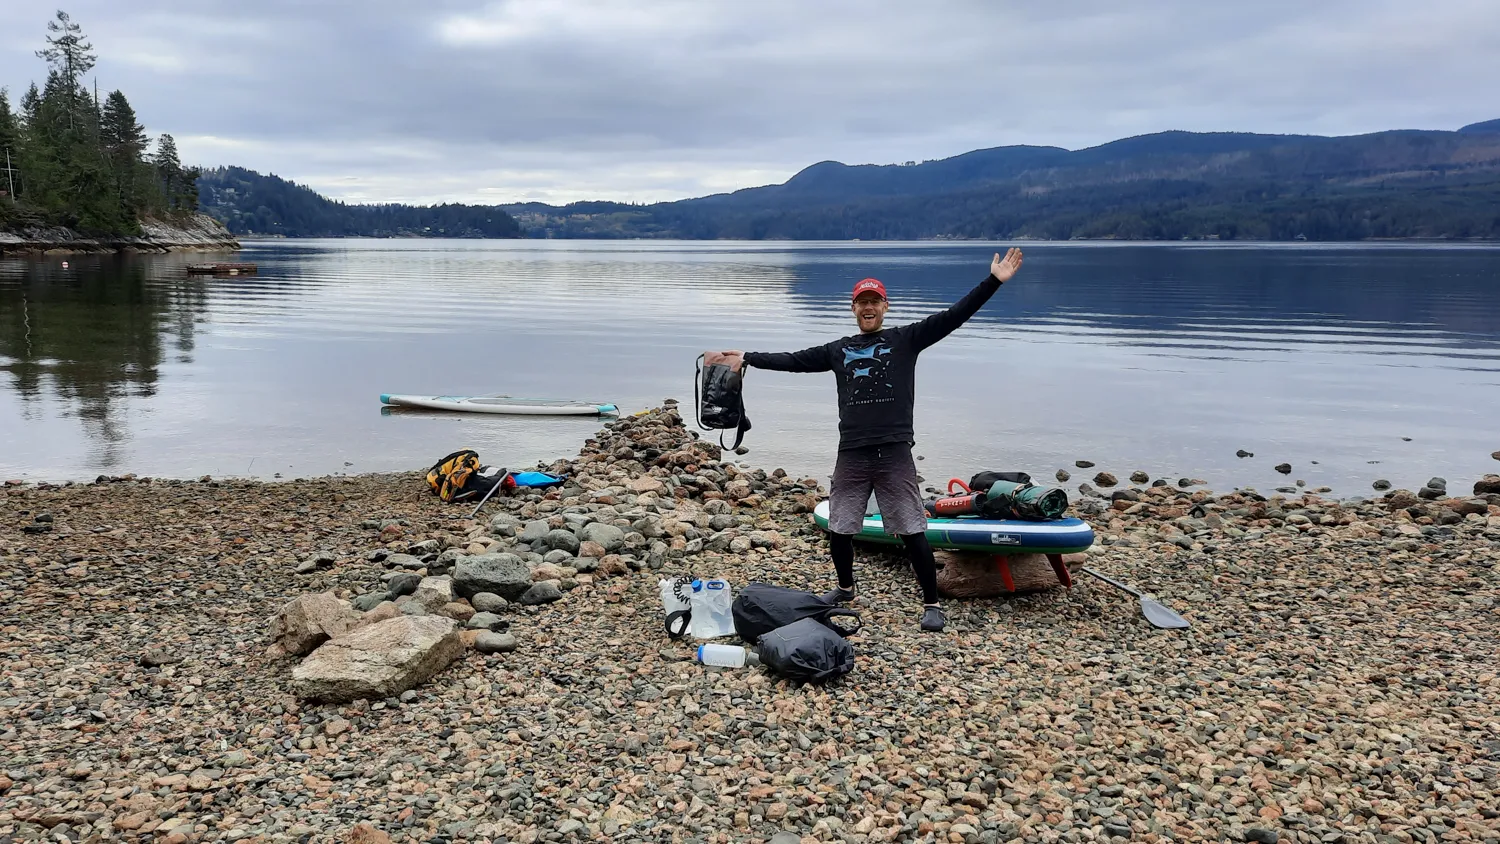 Day and overnight touring on your SUP in Vancouver and Lower Mainland BC